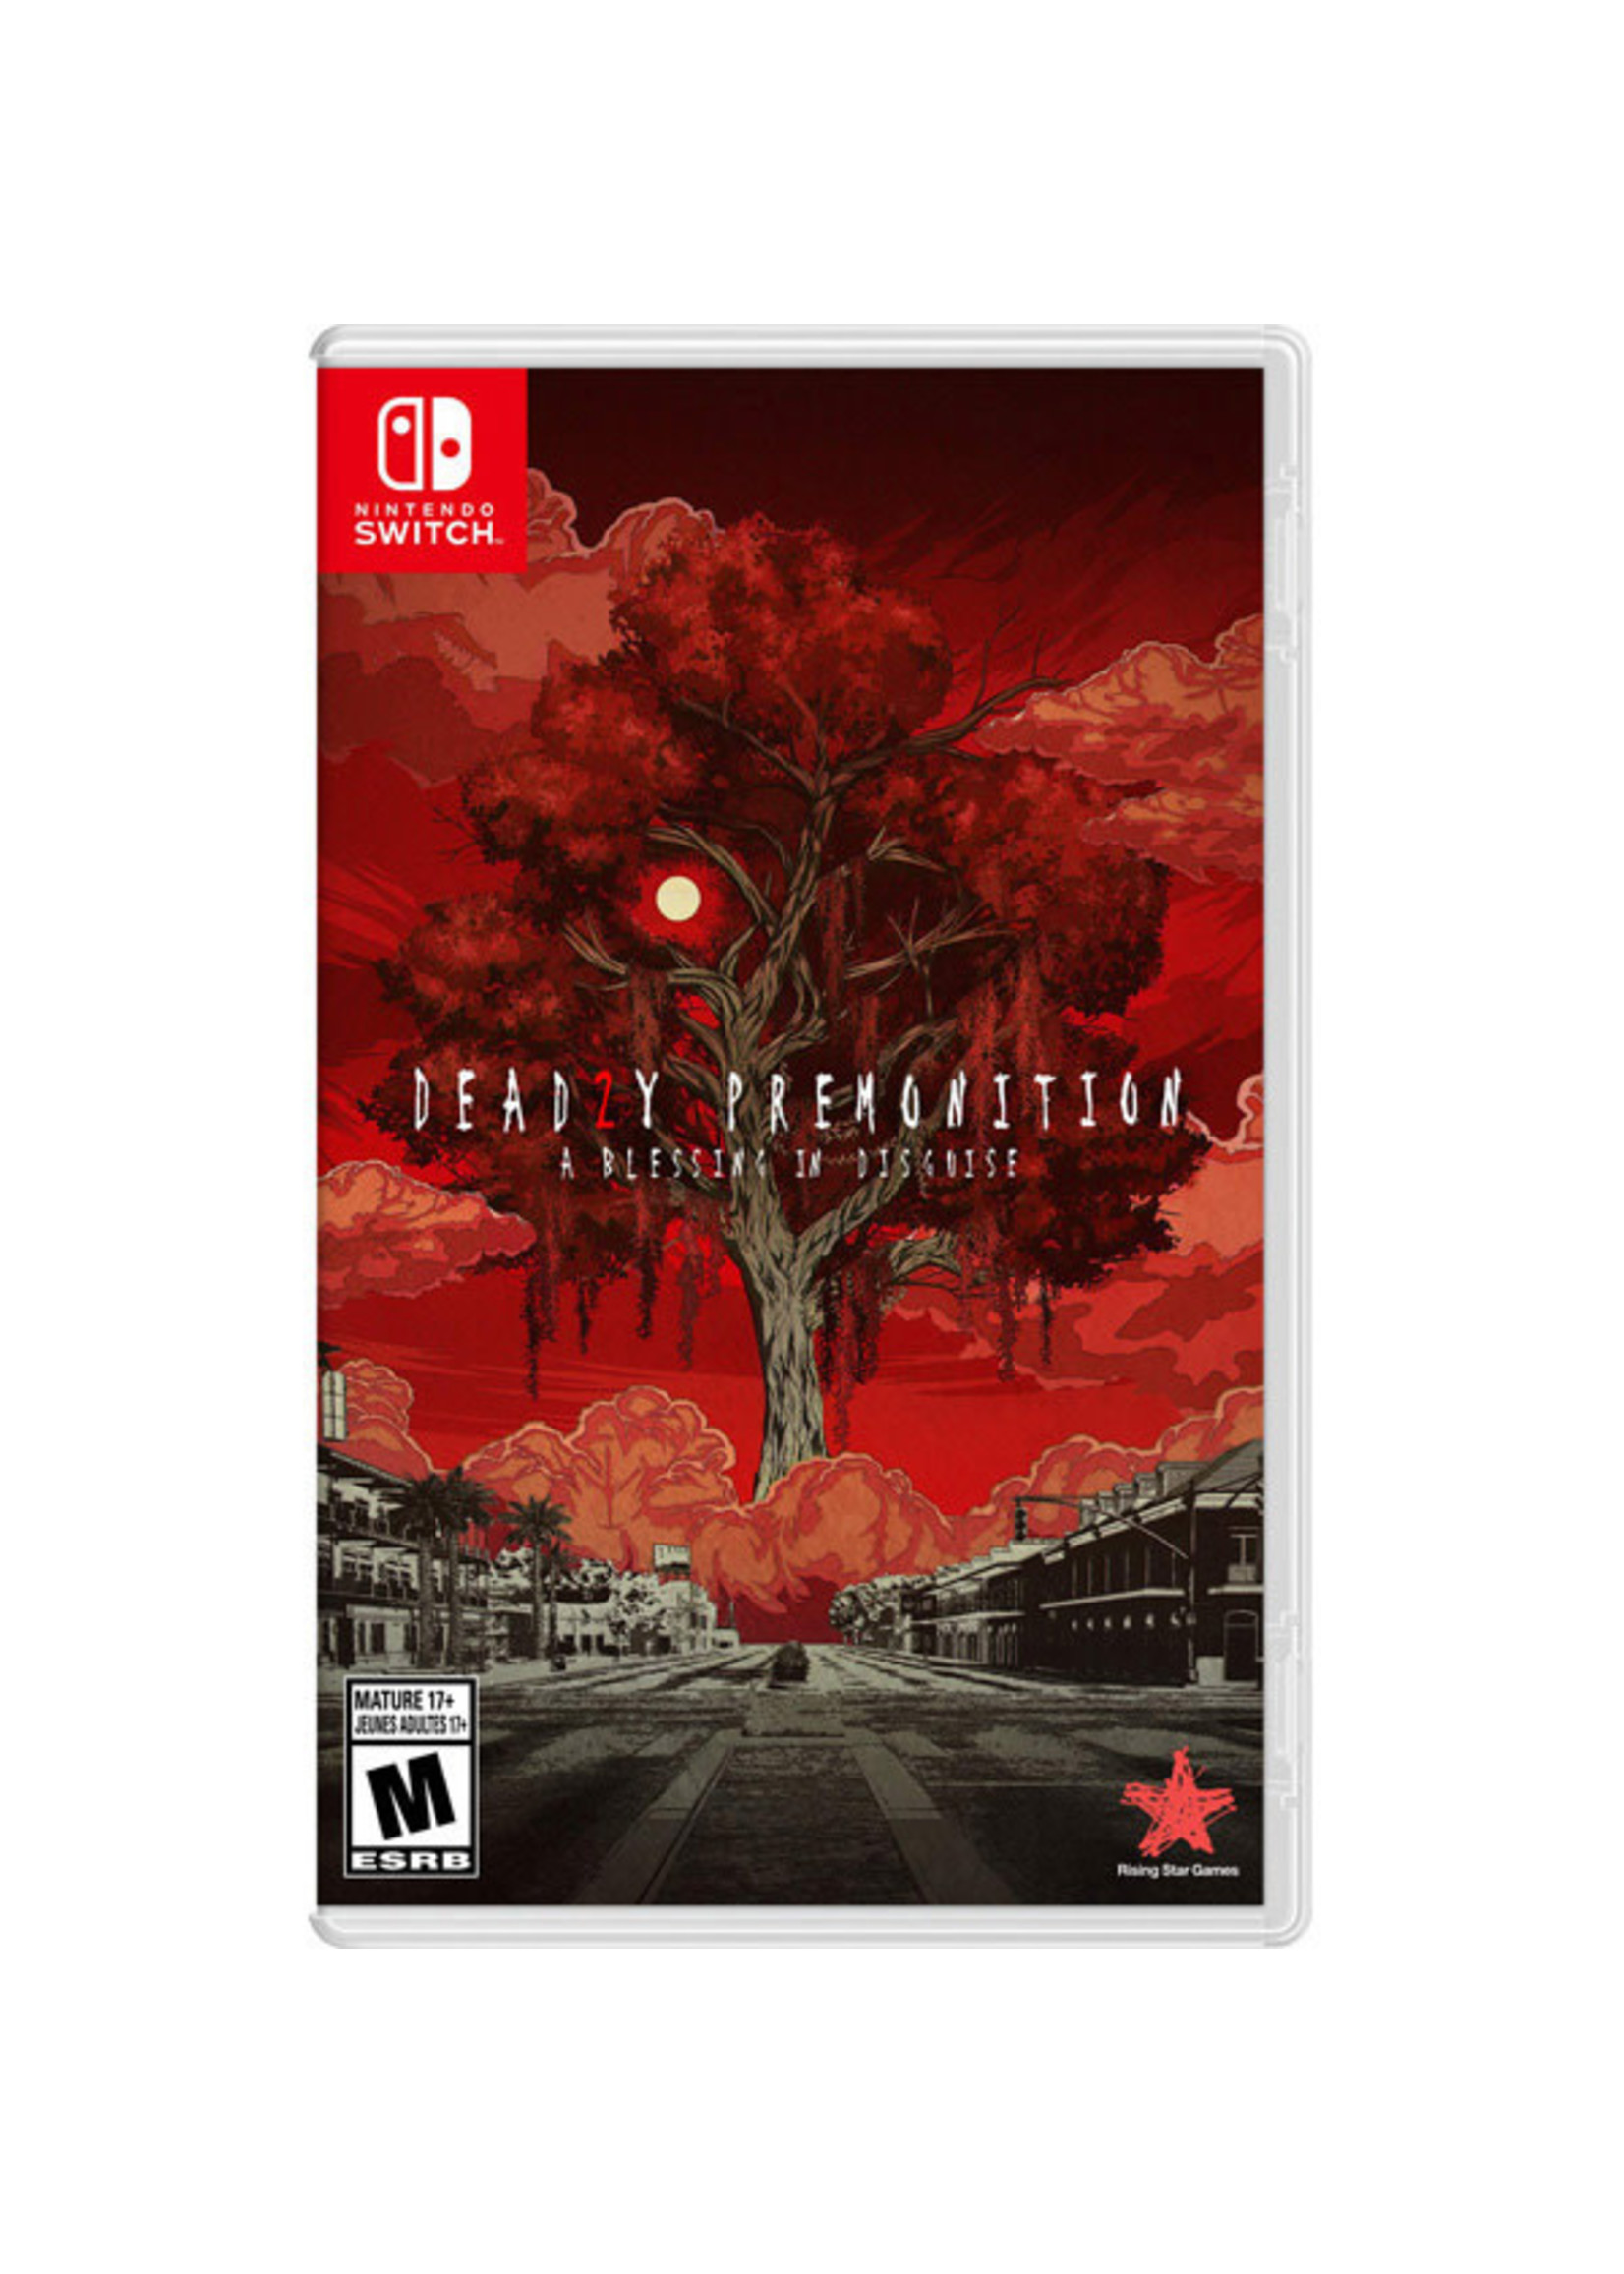 DEADLY PREMONITION 2 A BLESSING IN DISGUISE SWITCH